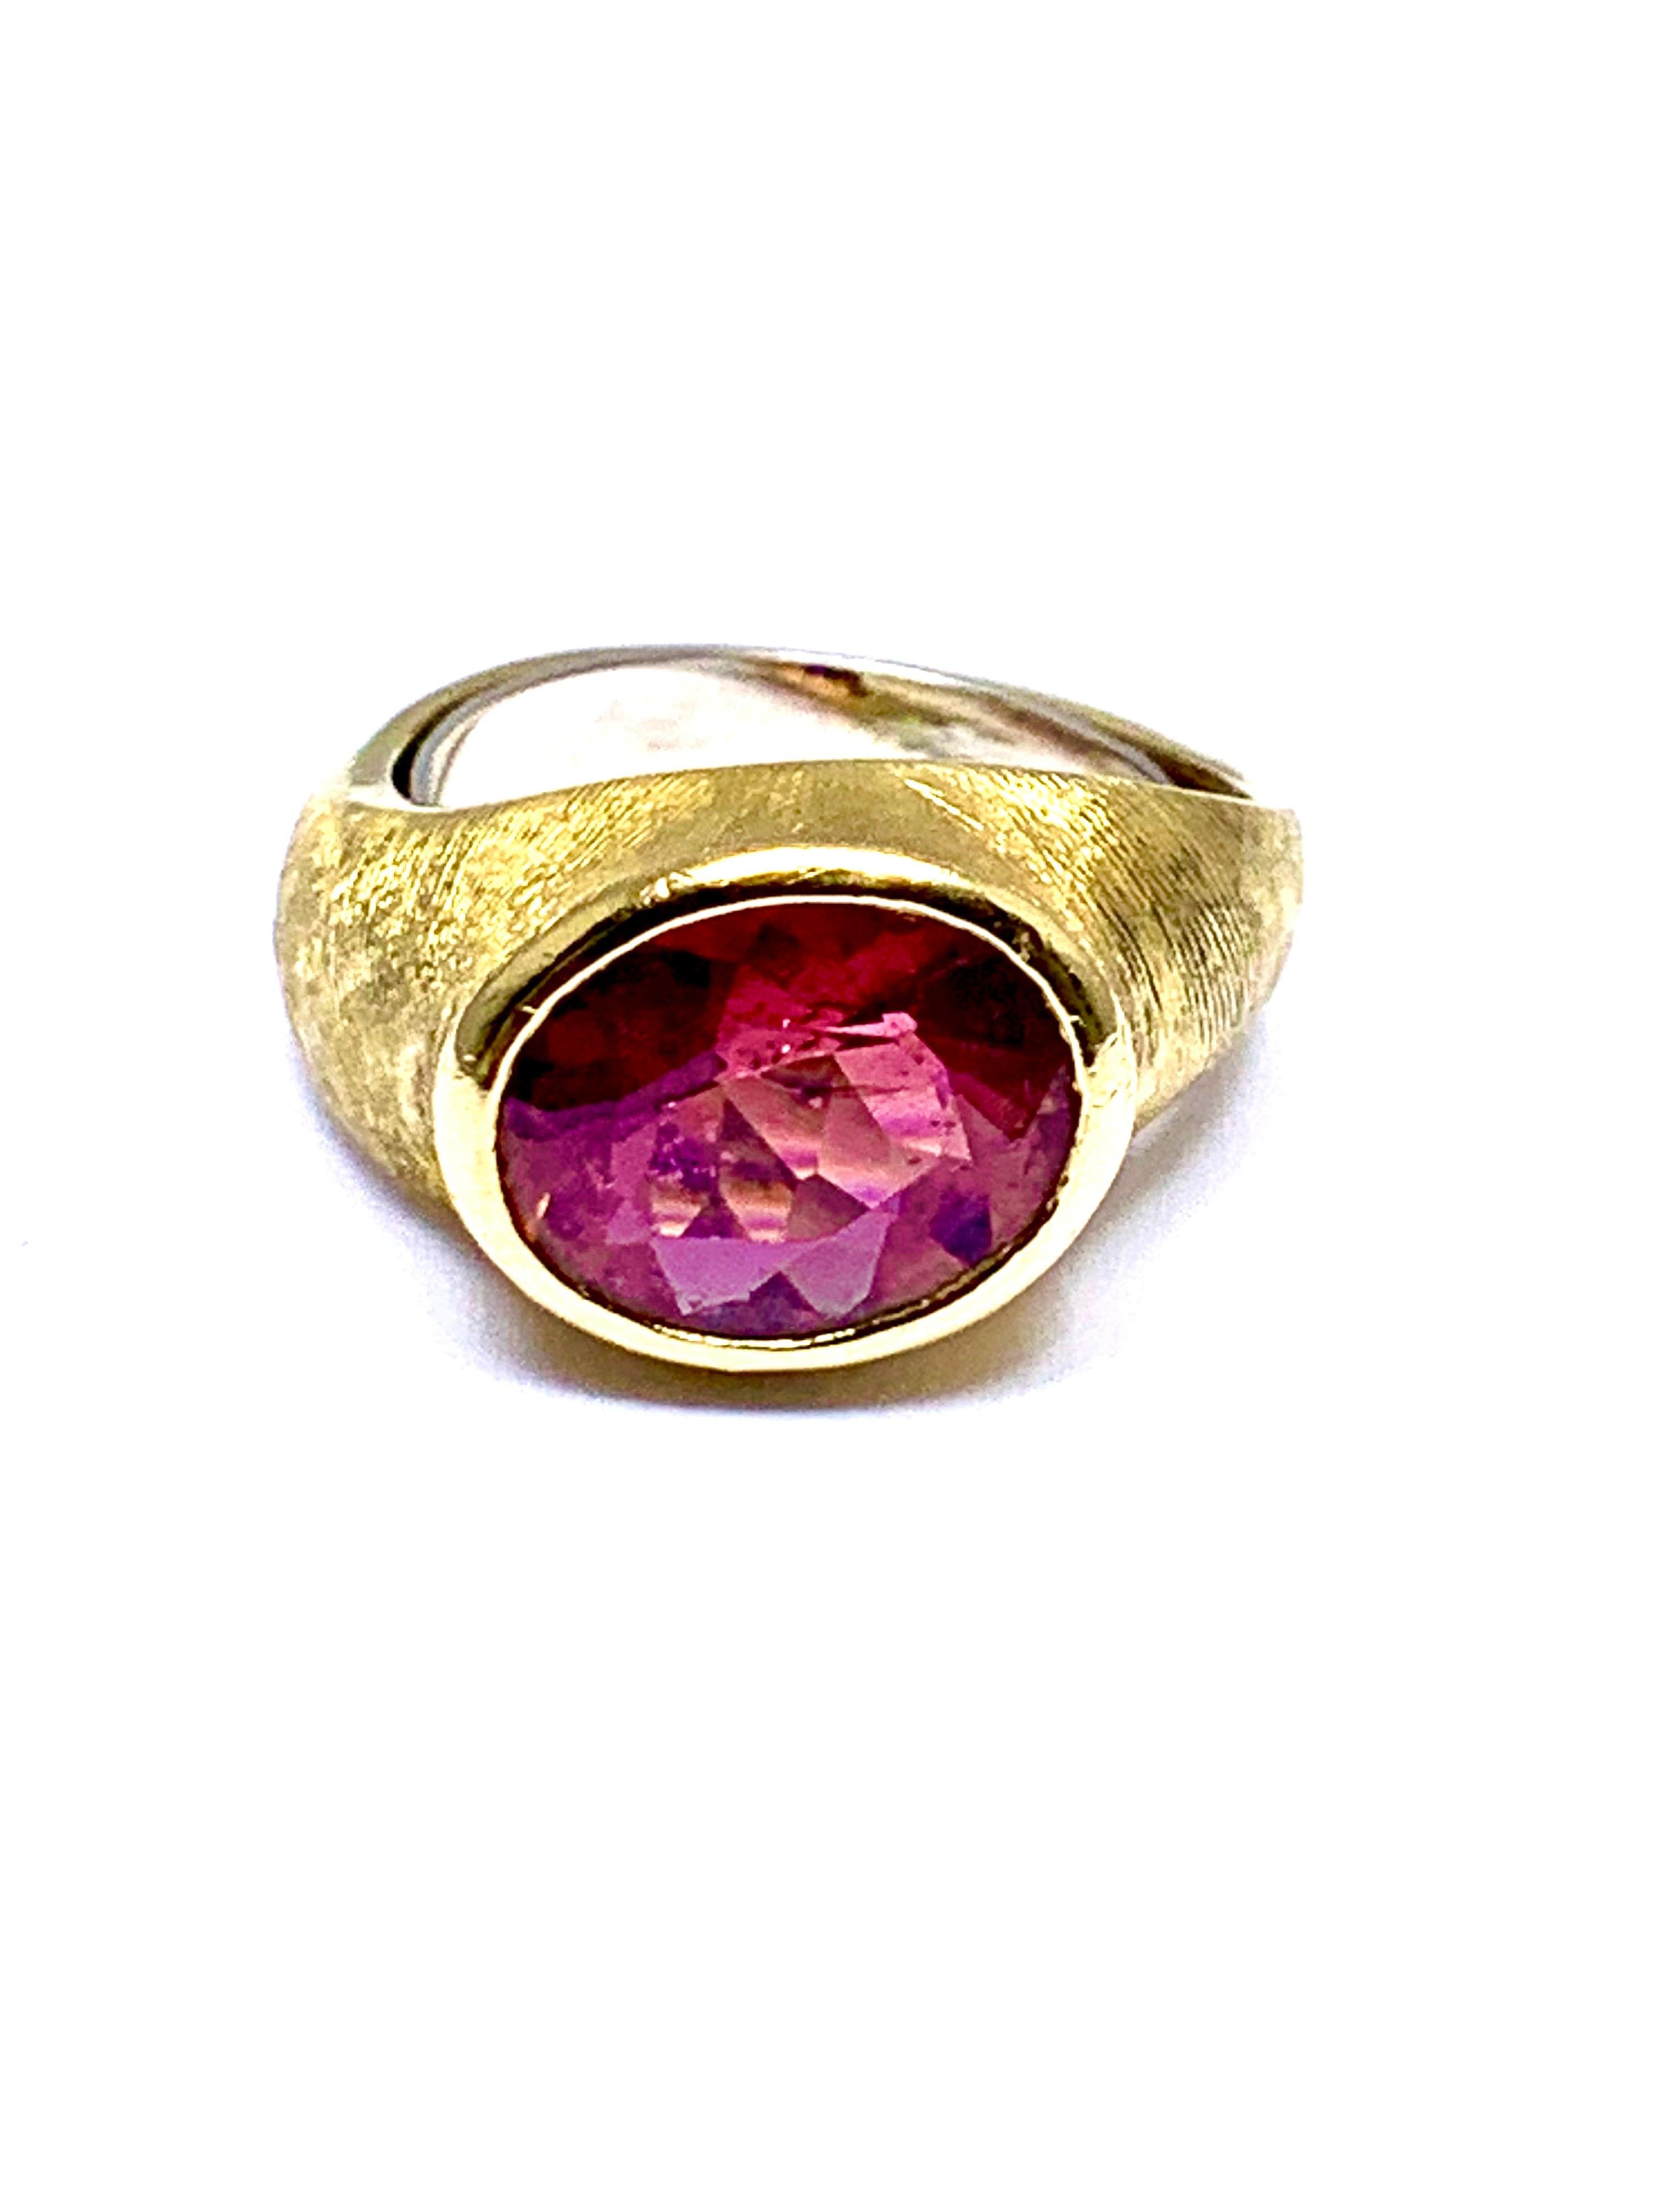 Retro Burle Marx 3.57 Carat Faceted Oval Pink Tourmaline and 18 Karat Yellow Gold Ring